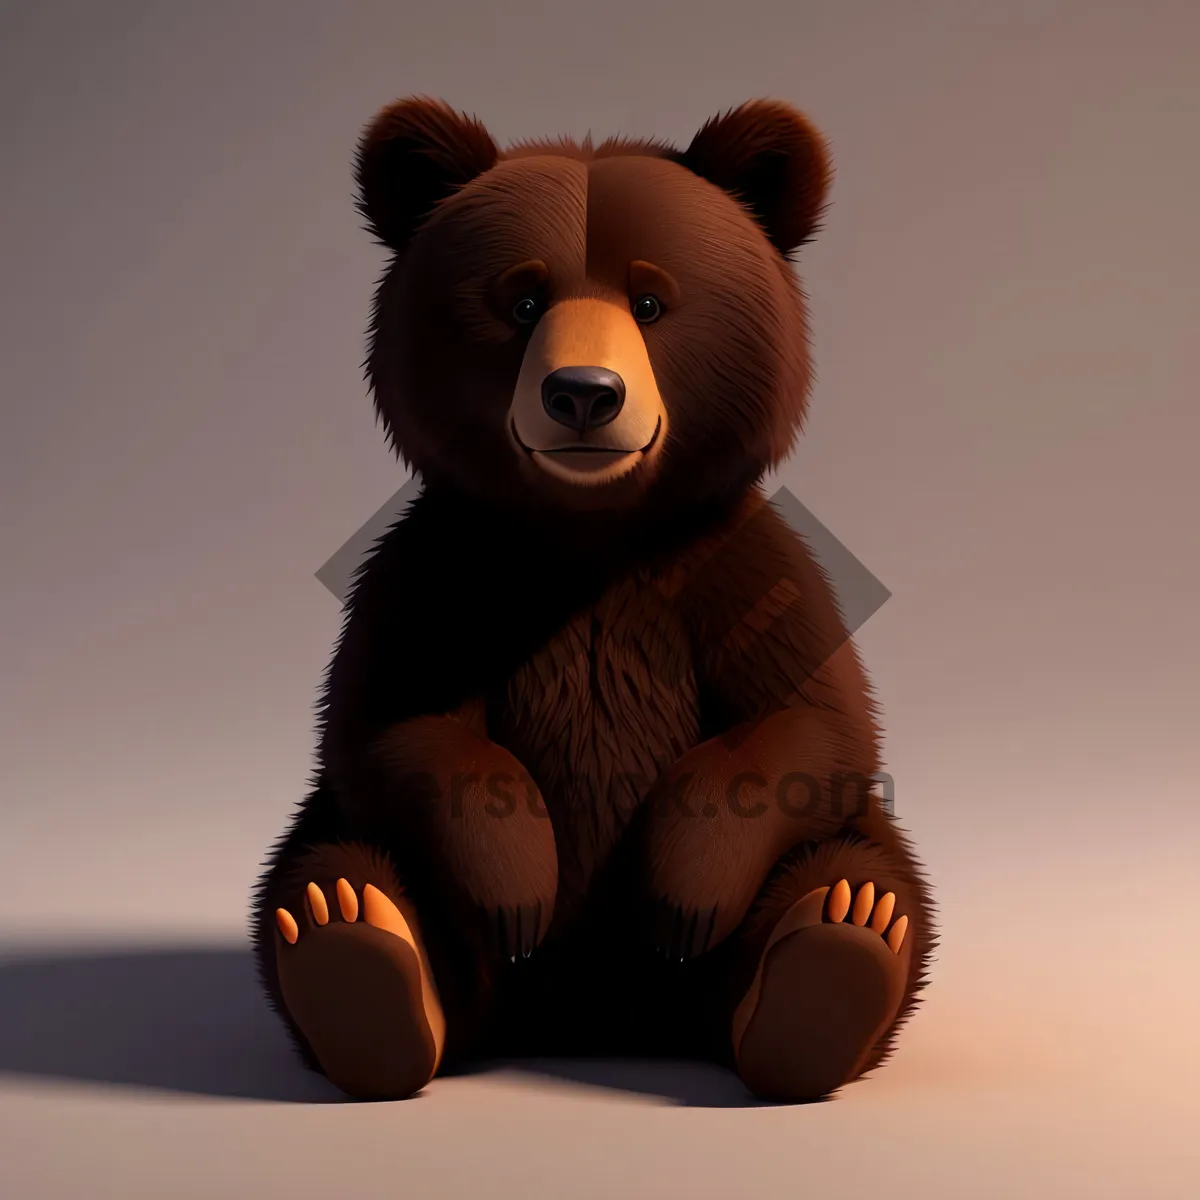 Picture of Adorable Teddy Bear Toy for Playful Children